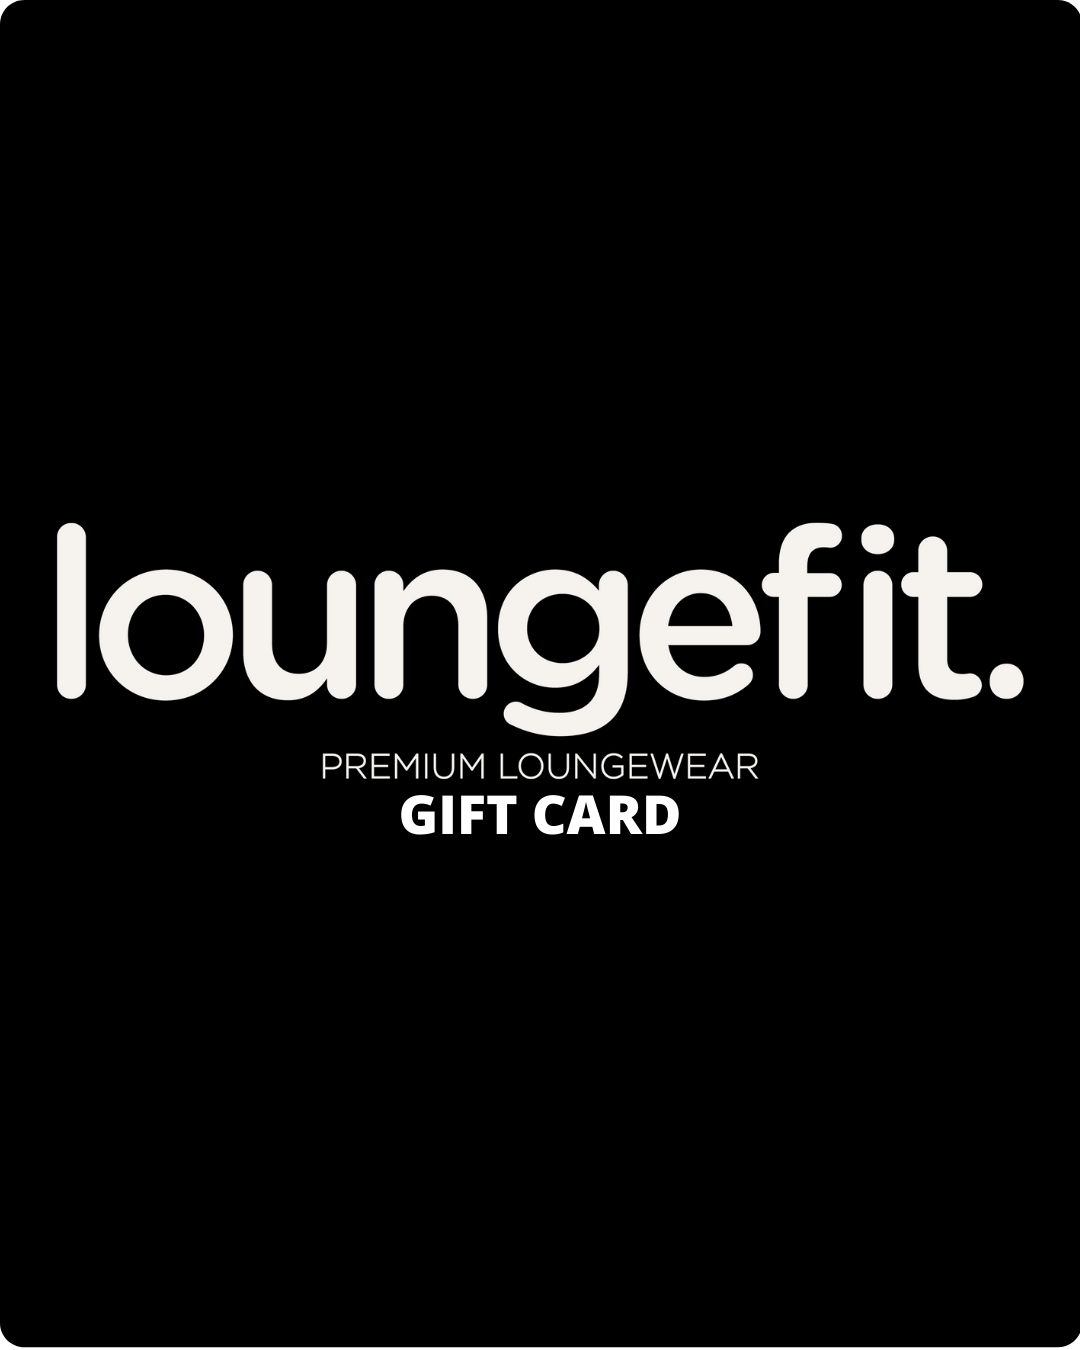 loungefit. Gift Card